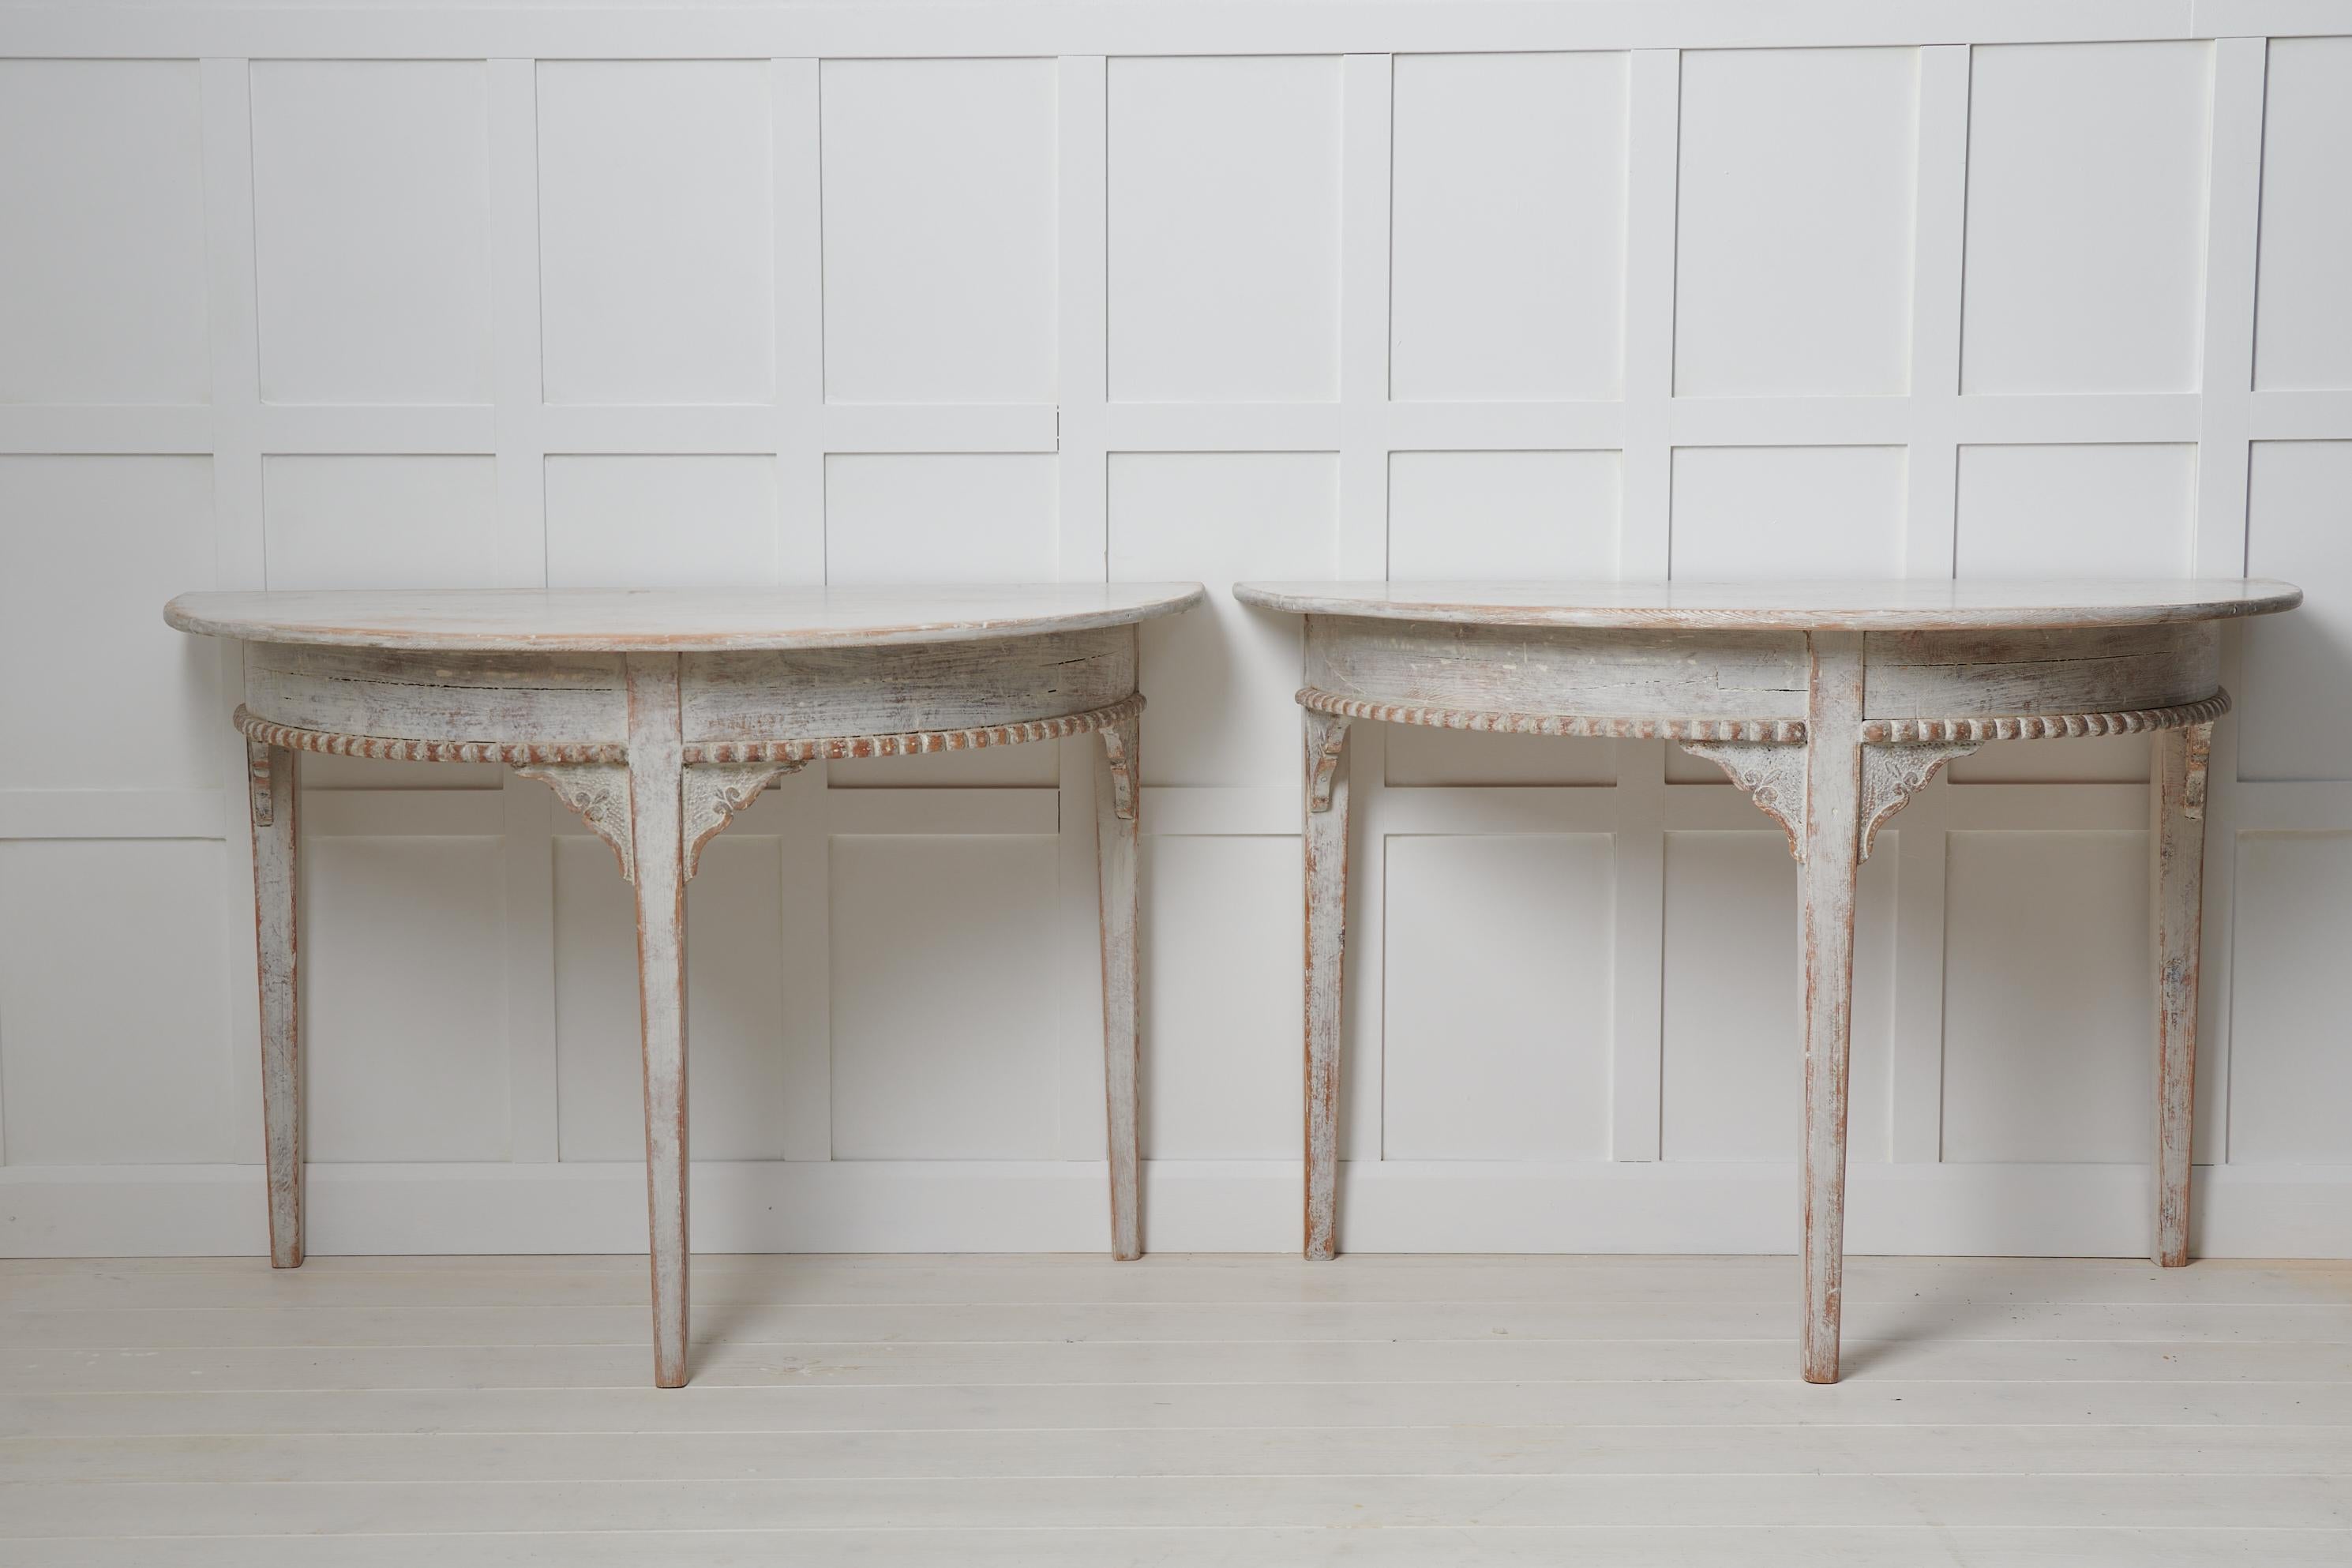 Antique demi lune table in gustavian style from Sweden. The table is a country furniture from around the 1840s and is made in two halves. Made by hand in painted pine with an unusual decor with corbels and a carved band wrapping around the table.